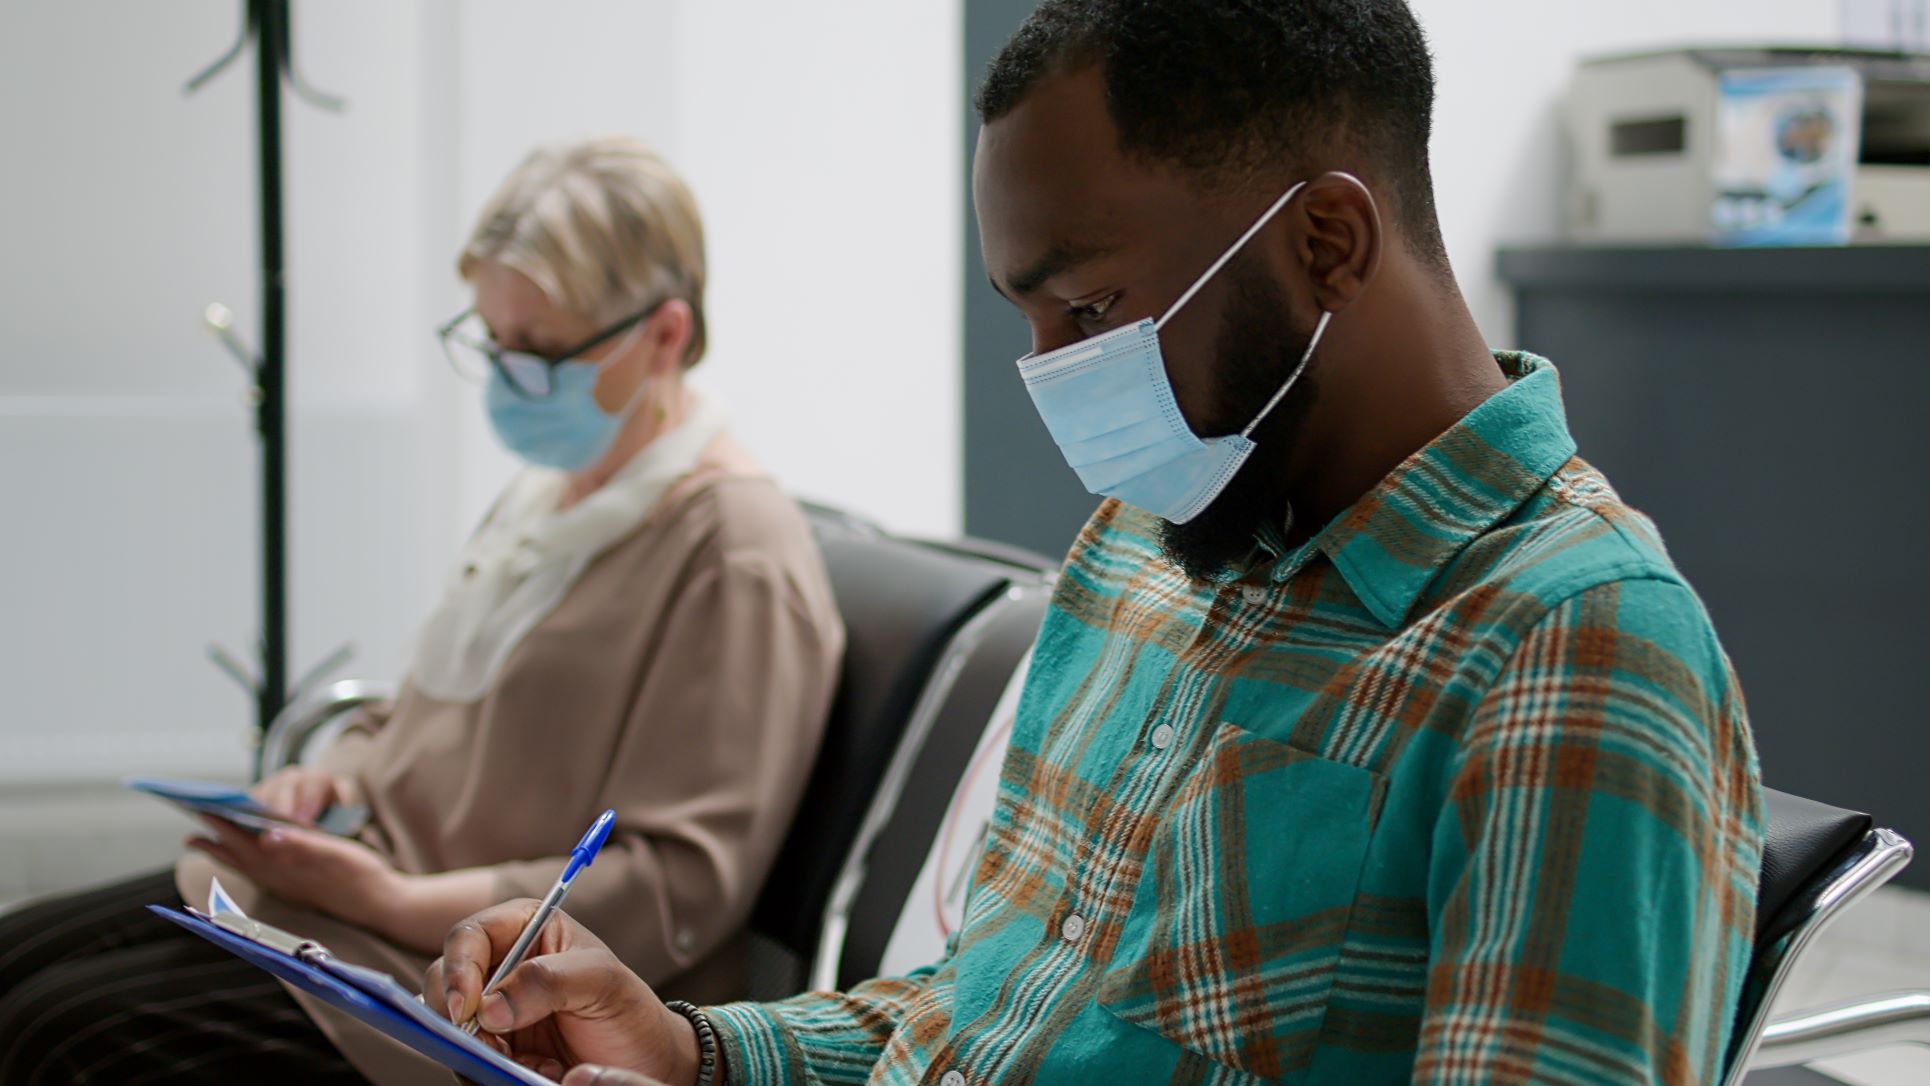 Two people in waiting room wearing surgical masks